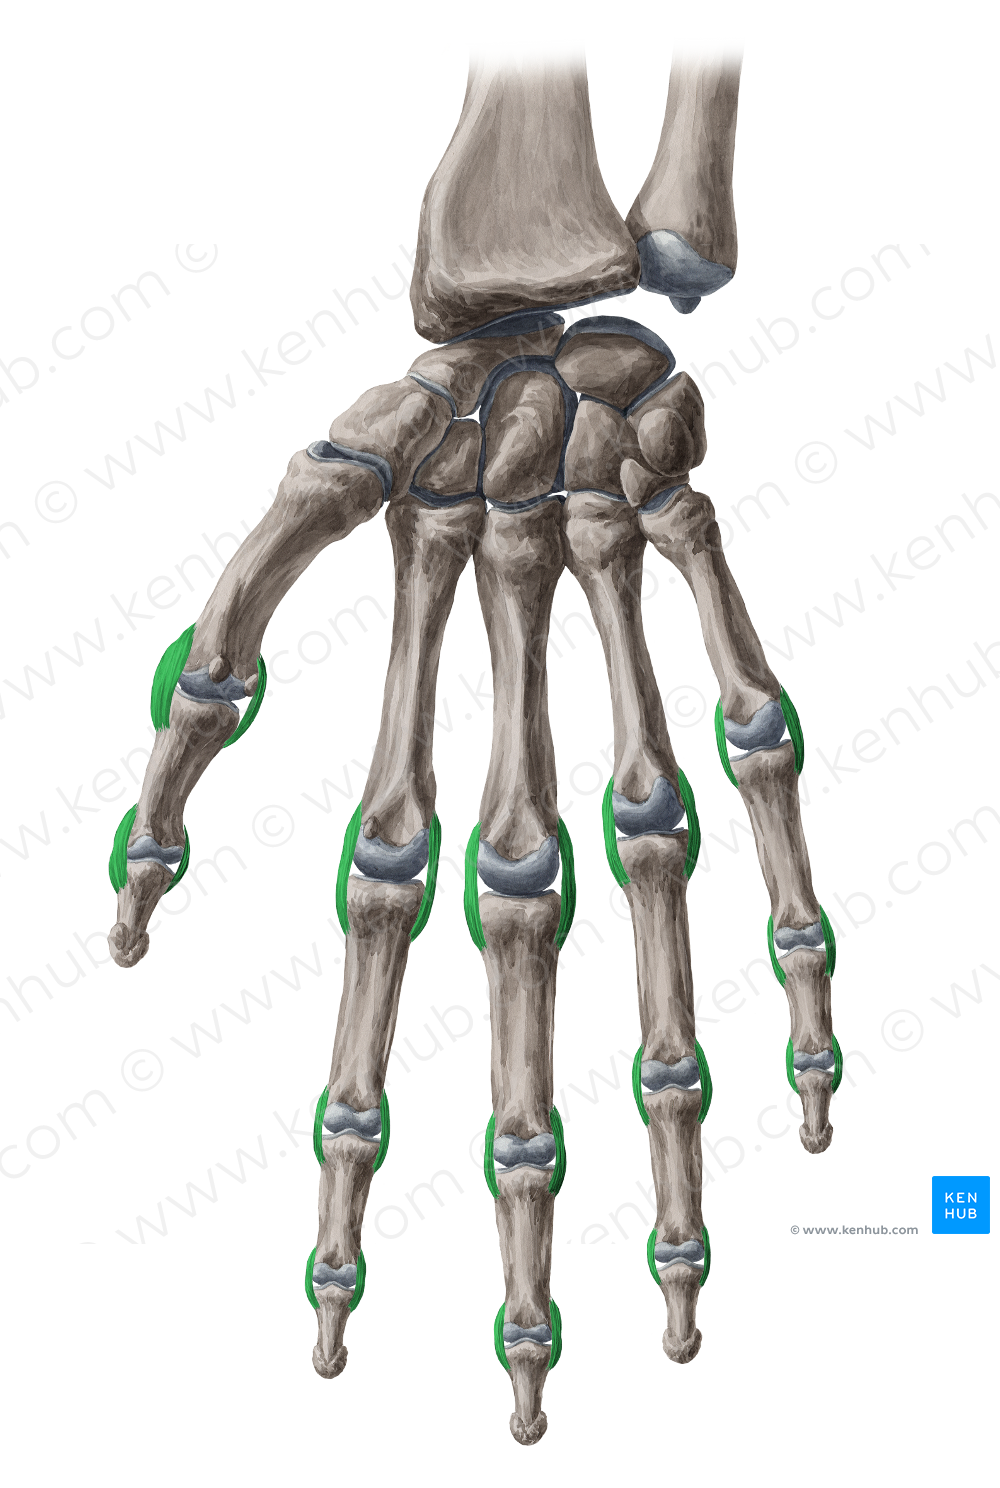 Collateral ligaments of interphalageal and metacarpophalangeal joints (#4457)